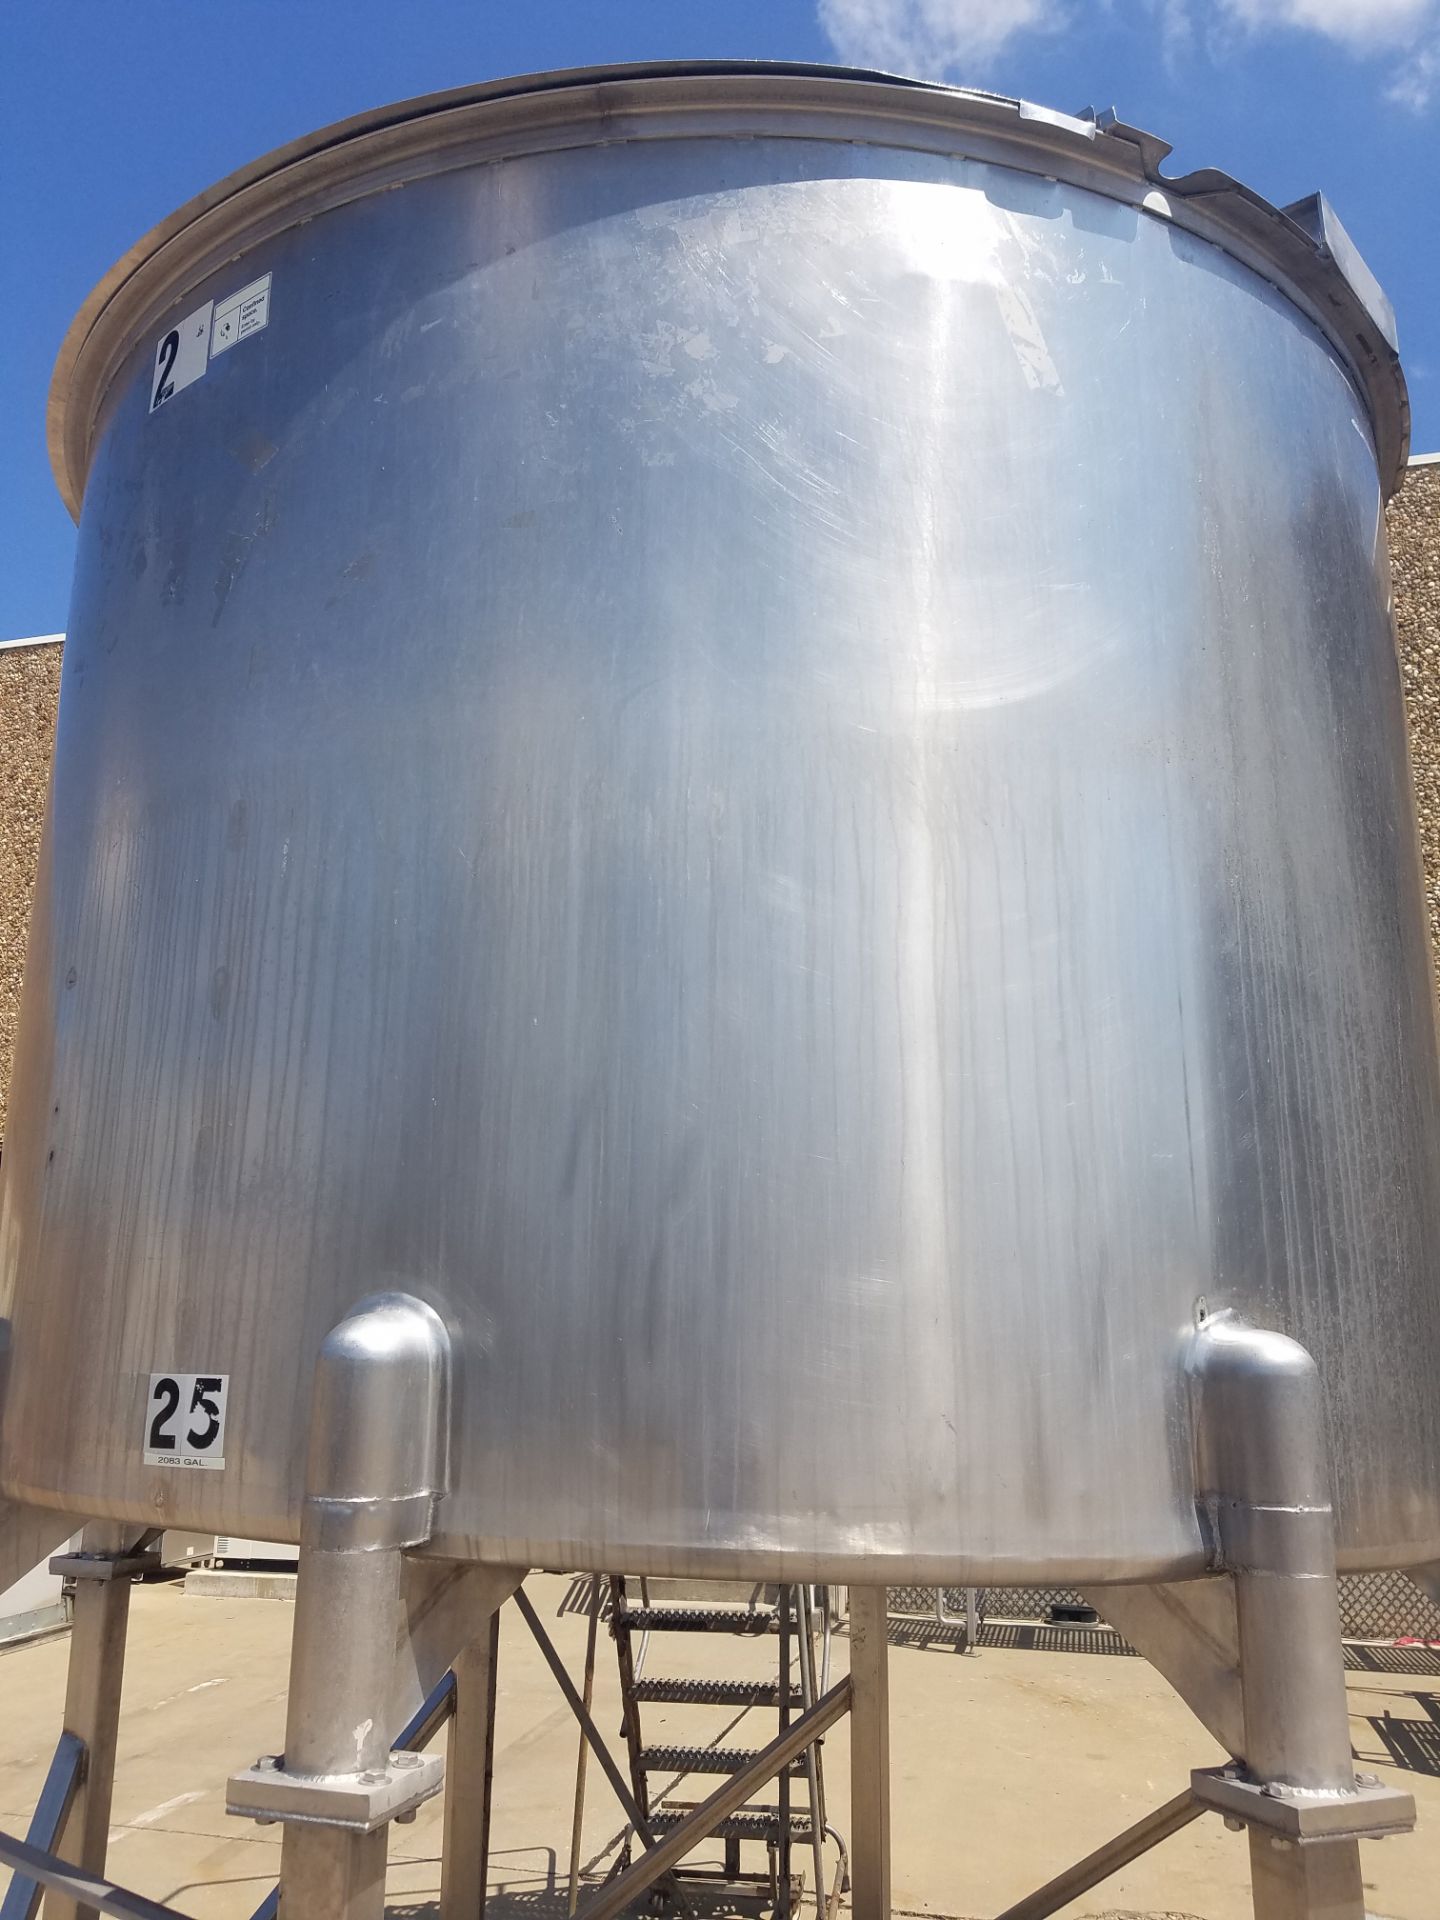 Aprox. 2,083 Gal. S/S Mixing Tank, Tank Size: 96" wide x 72" high, 64" legs (Loading, Rigging & - Image 2 of 5